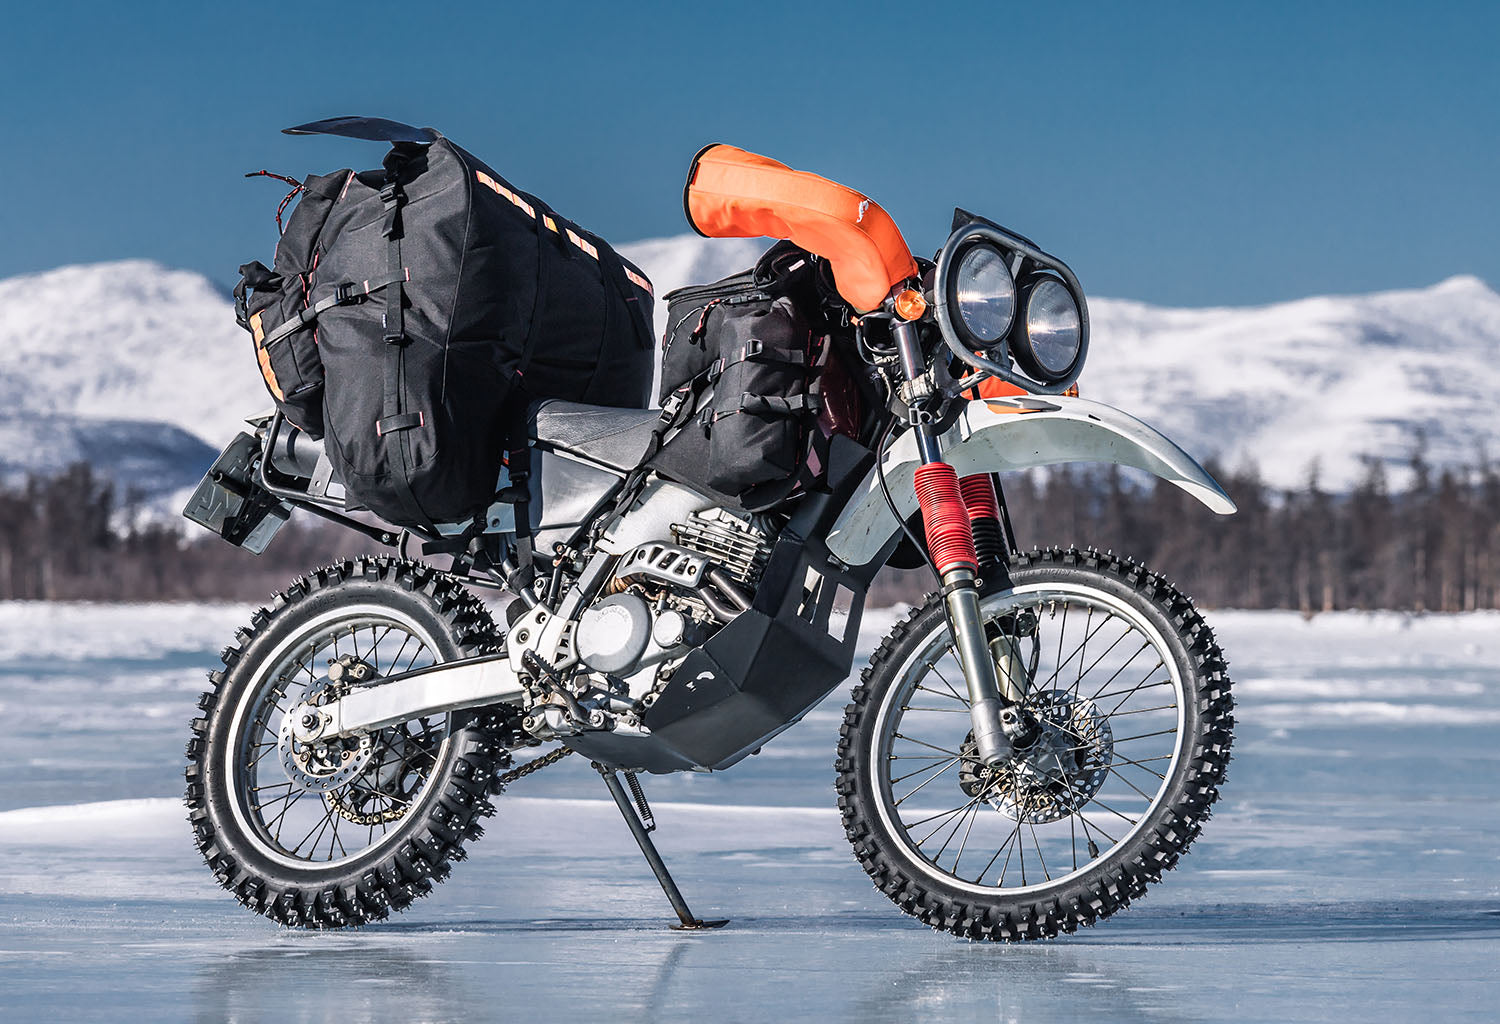 motorcycle prepared for riding in Siberia